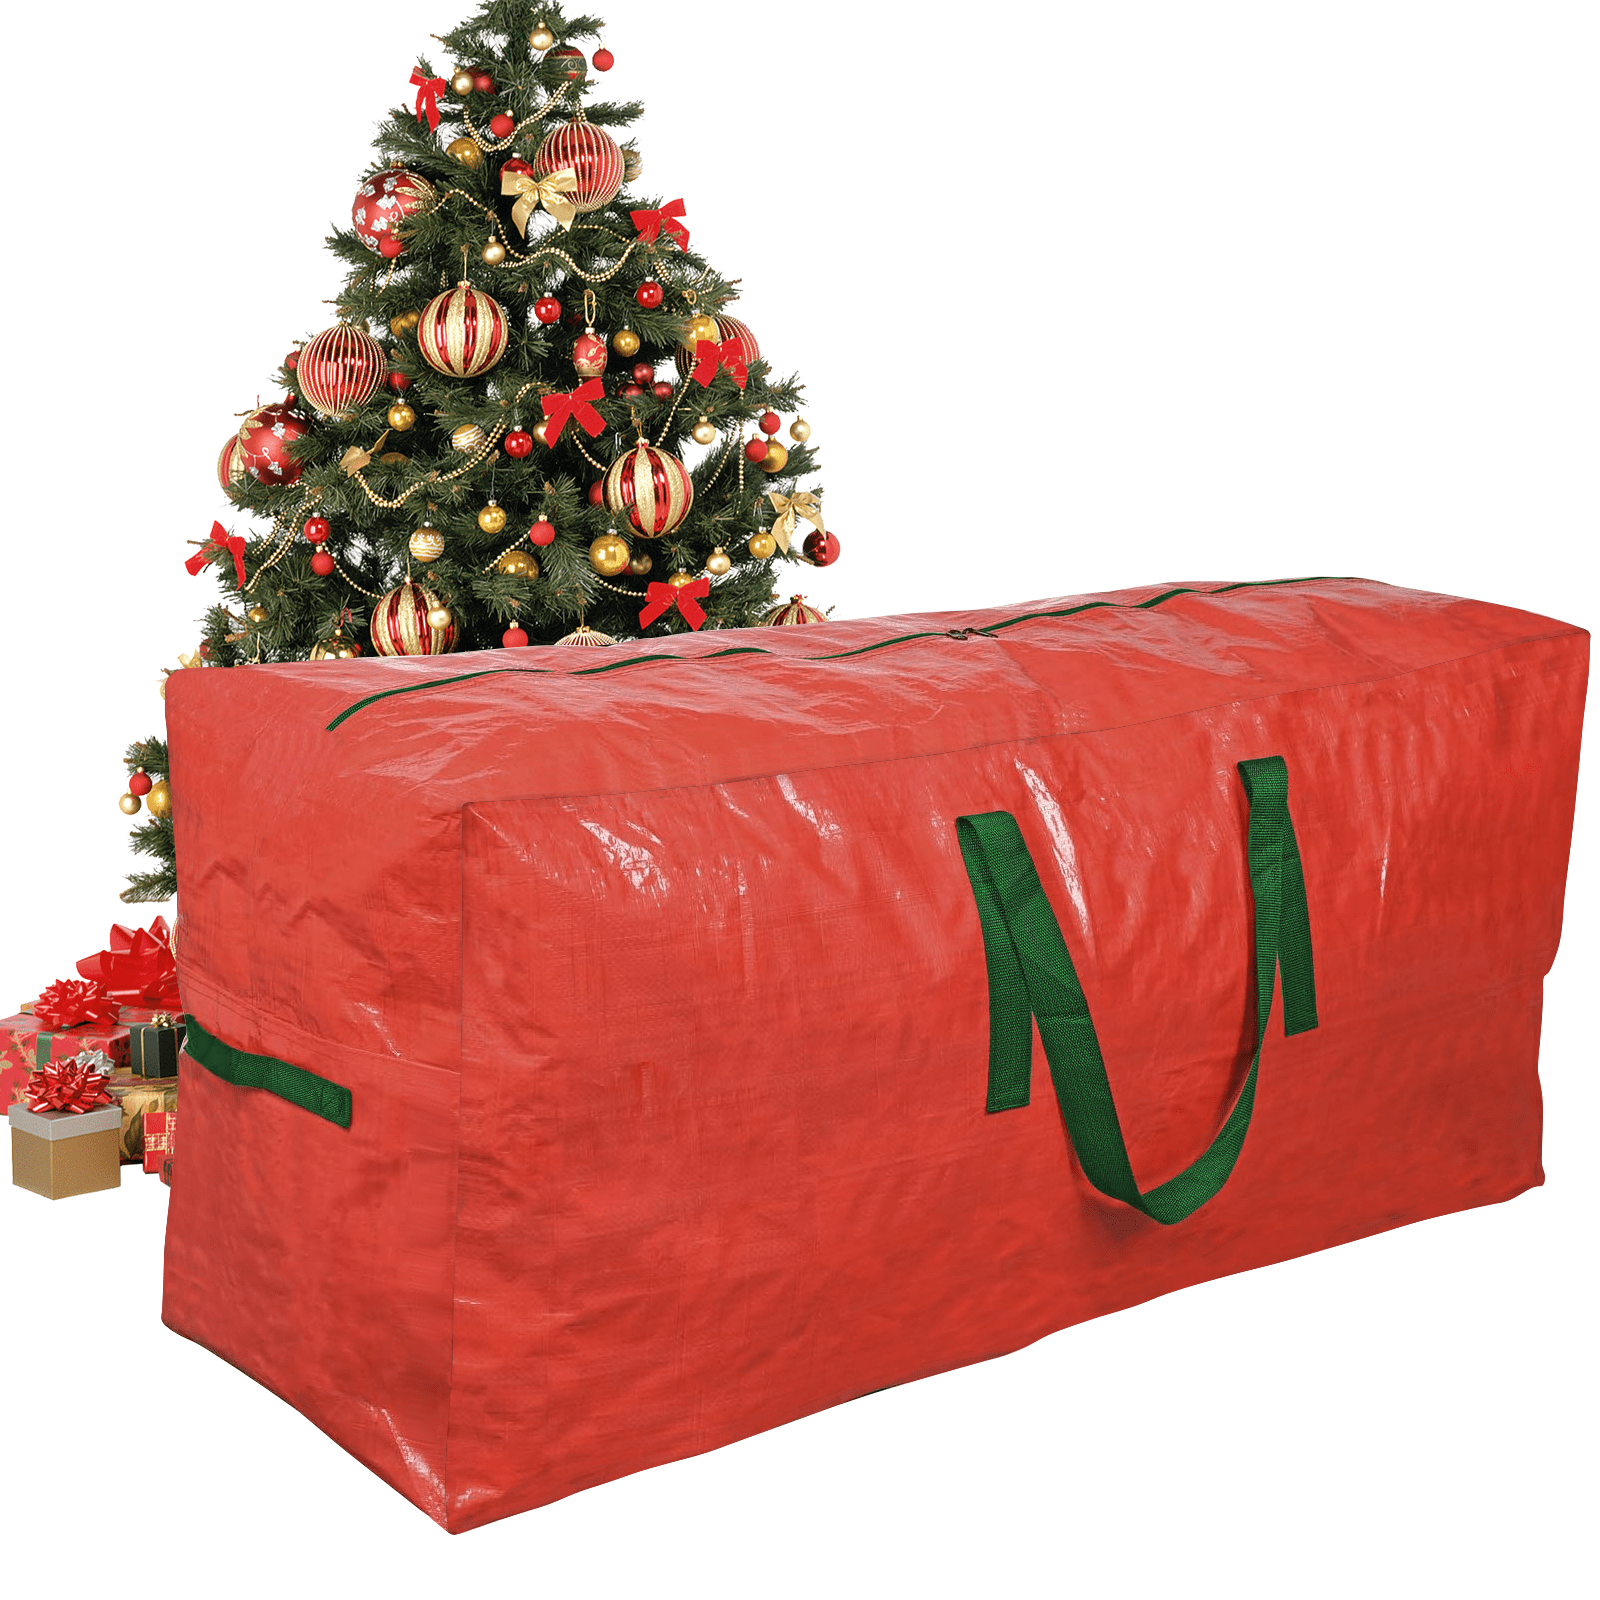 SONGMICS Christmas Tree Storage Bag Carry Bag for Trees up to 270cm 600D  Oxford Fabric Heavy Duty Lightweight Waterproof with Handles Green  RXS003G01 : Amazon.de: Home & Kitchen